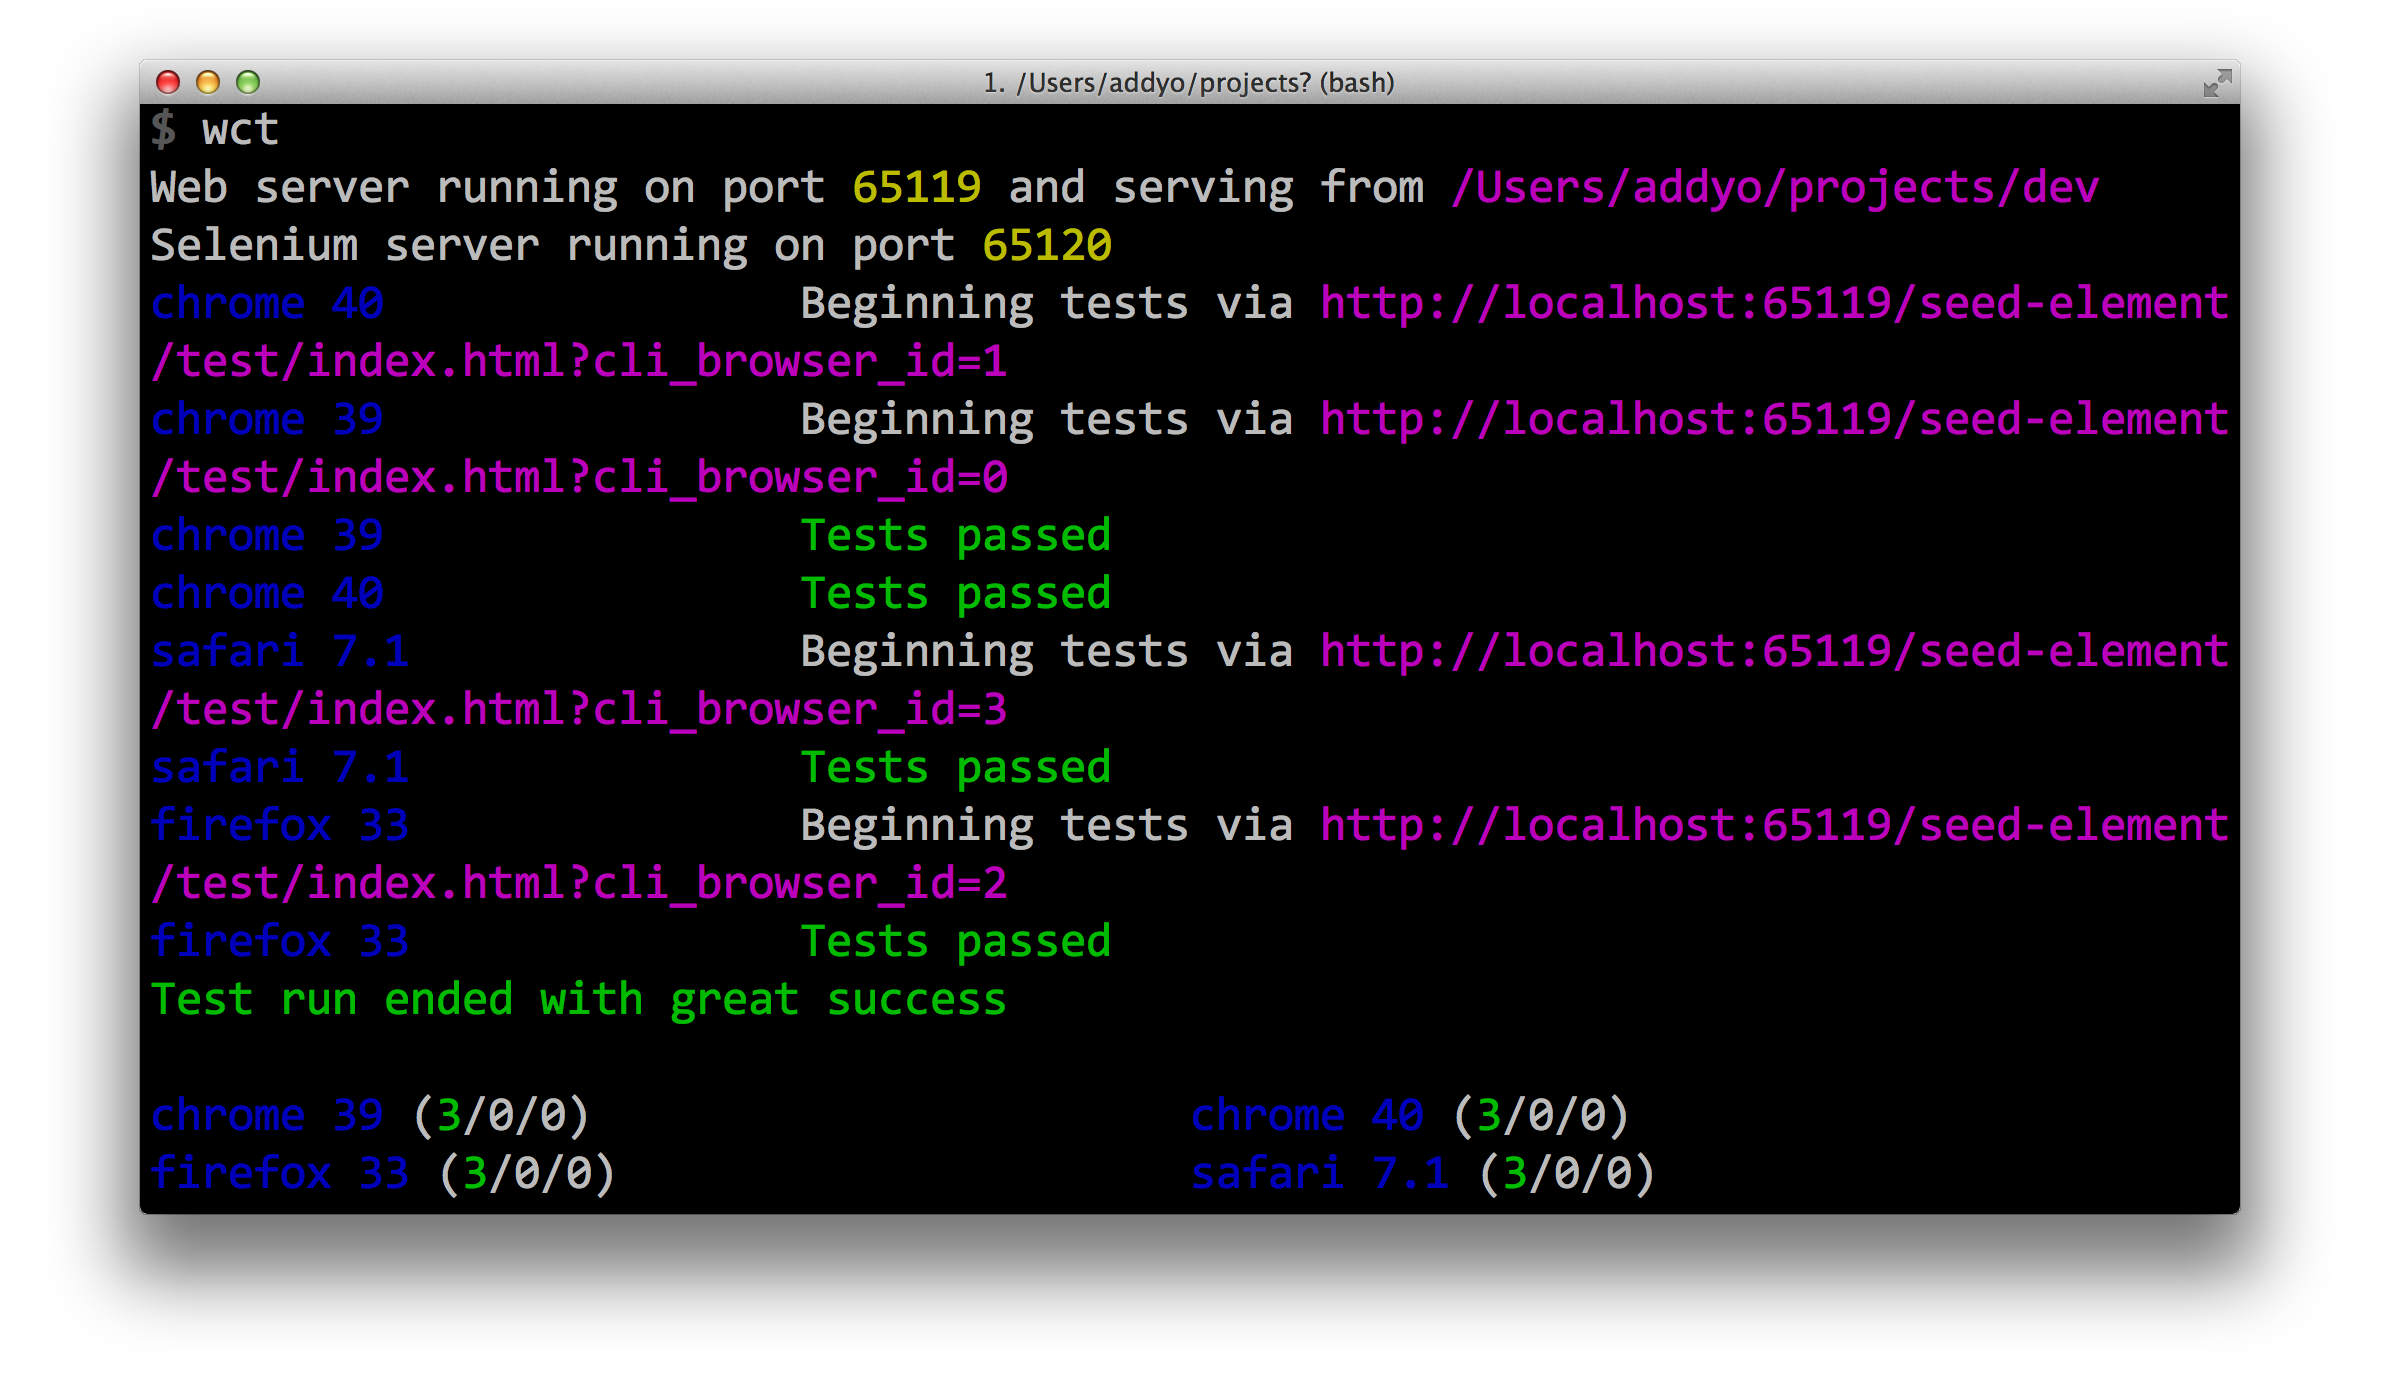 Test runner displaying a single test passing for seed-element